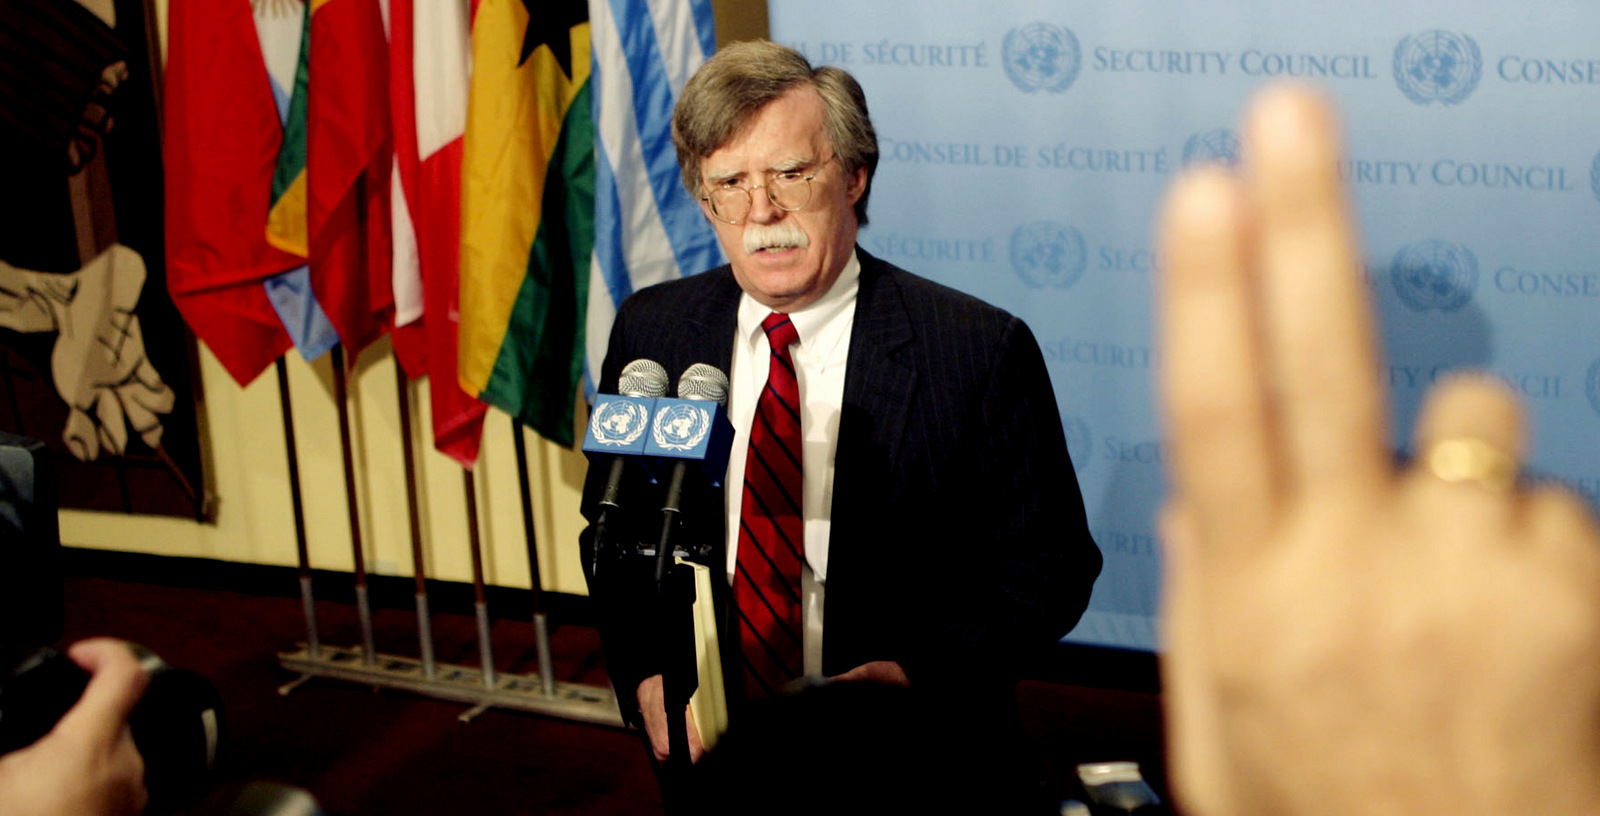 John Bolton, the U.S. ambassador to the United Nations speaks to media after a security council meeting at U.N. headquarters, Monday, Oct. 9, 2006. The Security Council voted to recommend Ban Ki-moon, Foreign Minister of South Korea, as the next Secretary-General of the U.N. (AP Photo/Seth Wenig)